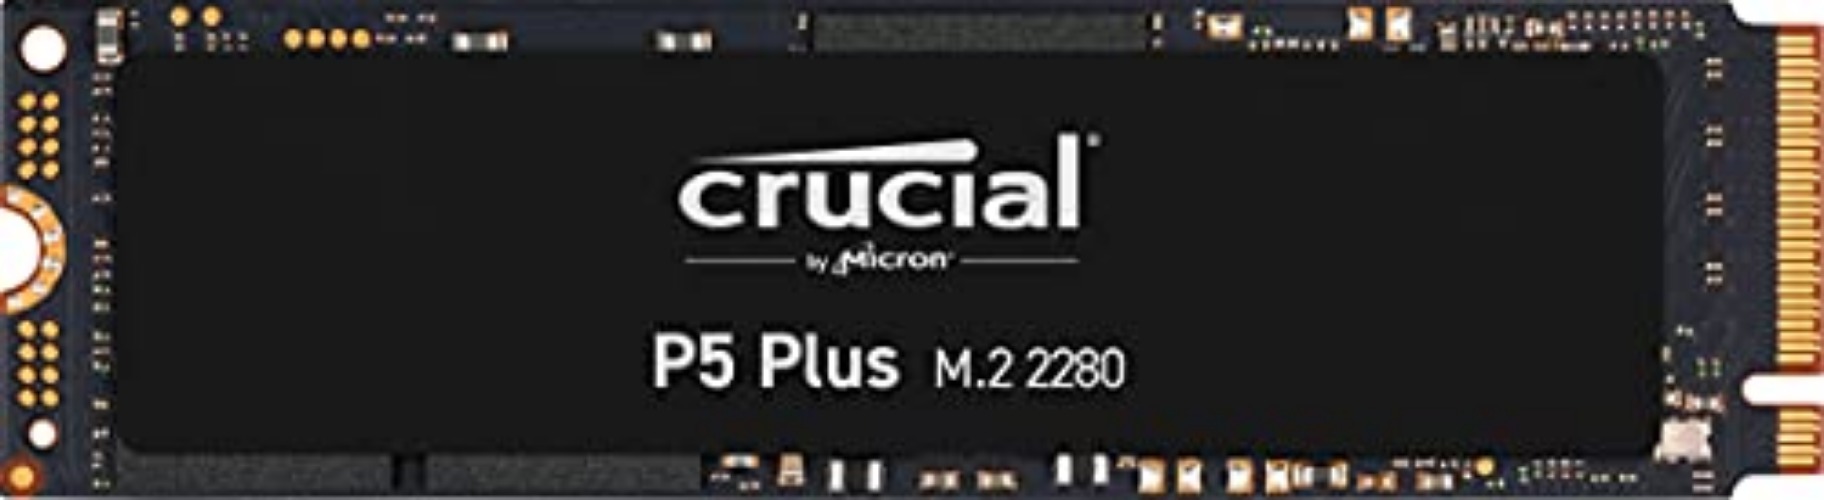 Crucial P5 Plus 1TB PCIe Gen4 3D NAND NVMe M.2 Gaming SSD, up to 6600MB/s - CT1000P5PSSD8 Solid State Drive - P5 Plus - 1TB